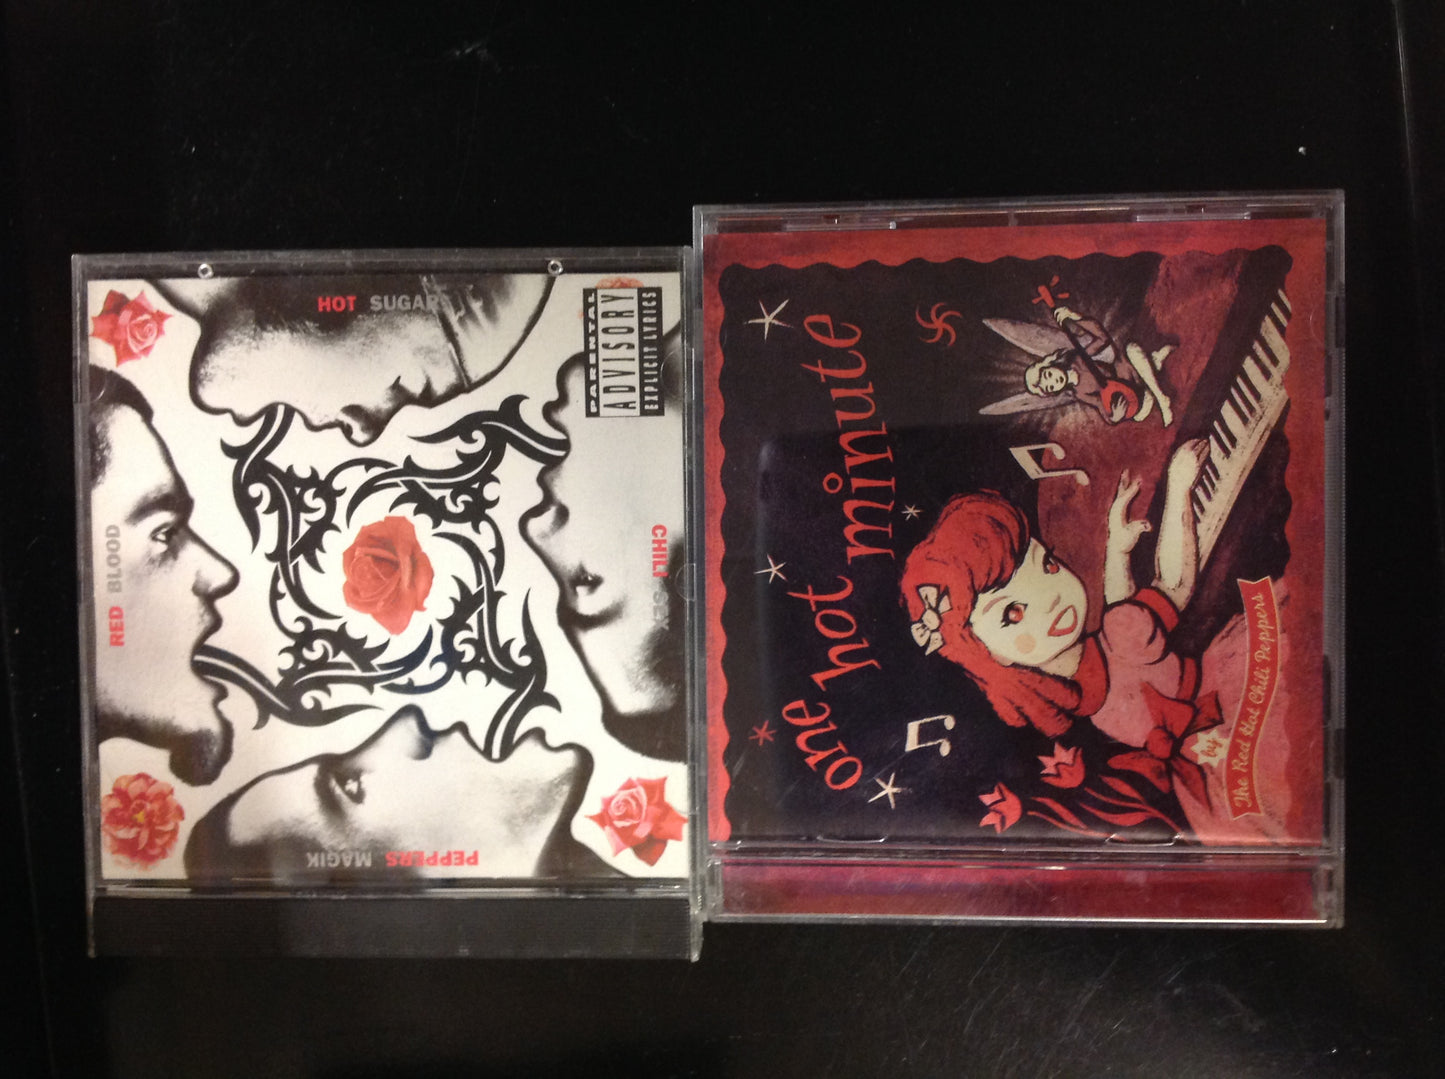 BARGAIN SET of 2 CD's Red Hot Chili Peppers RHCP One Hot Minute Blood Sugar Sex Magic